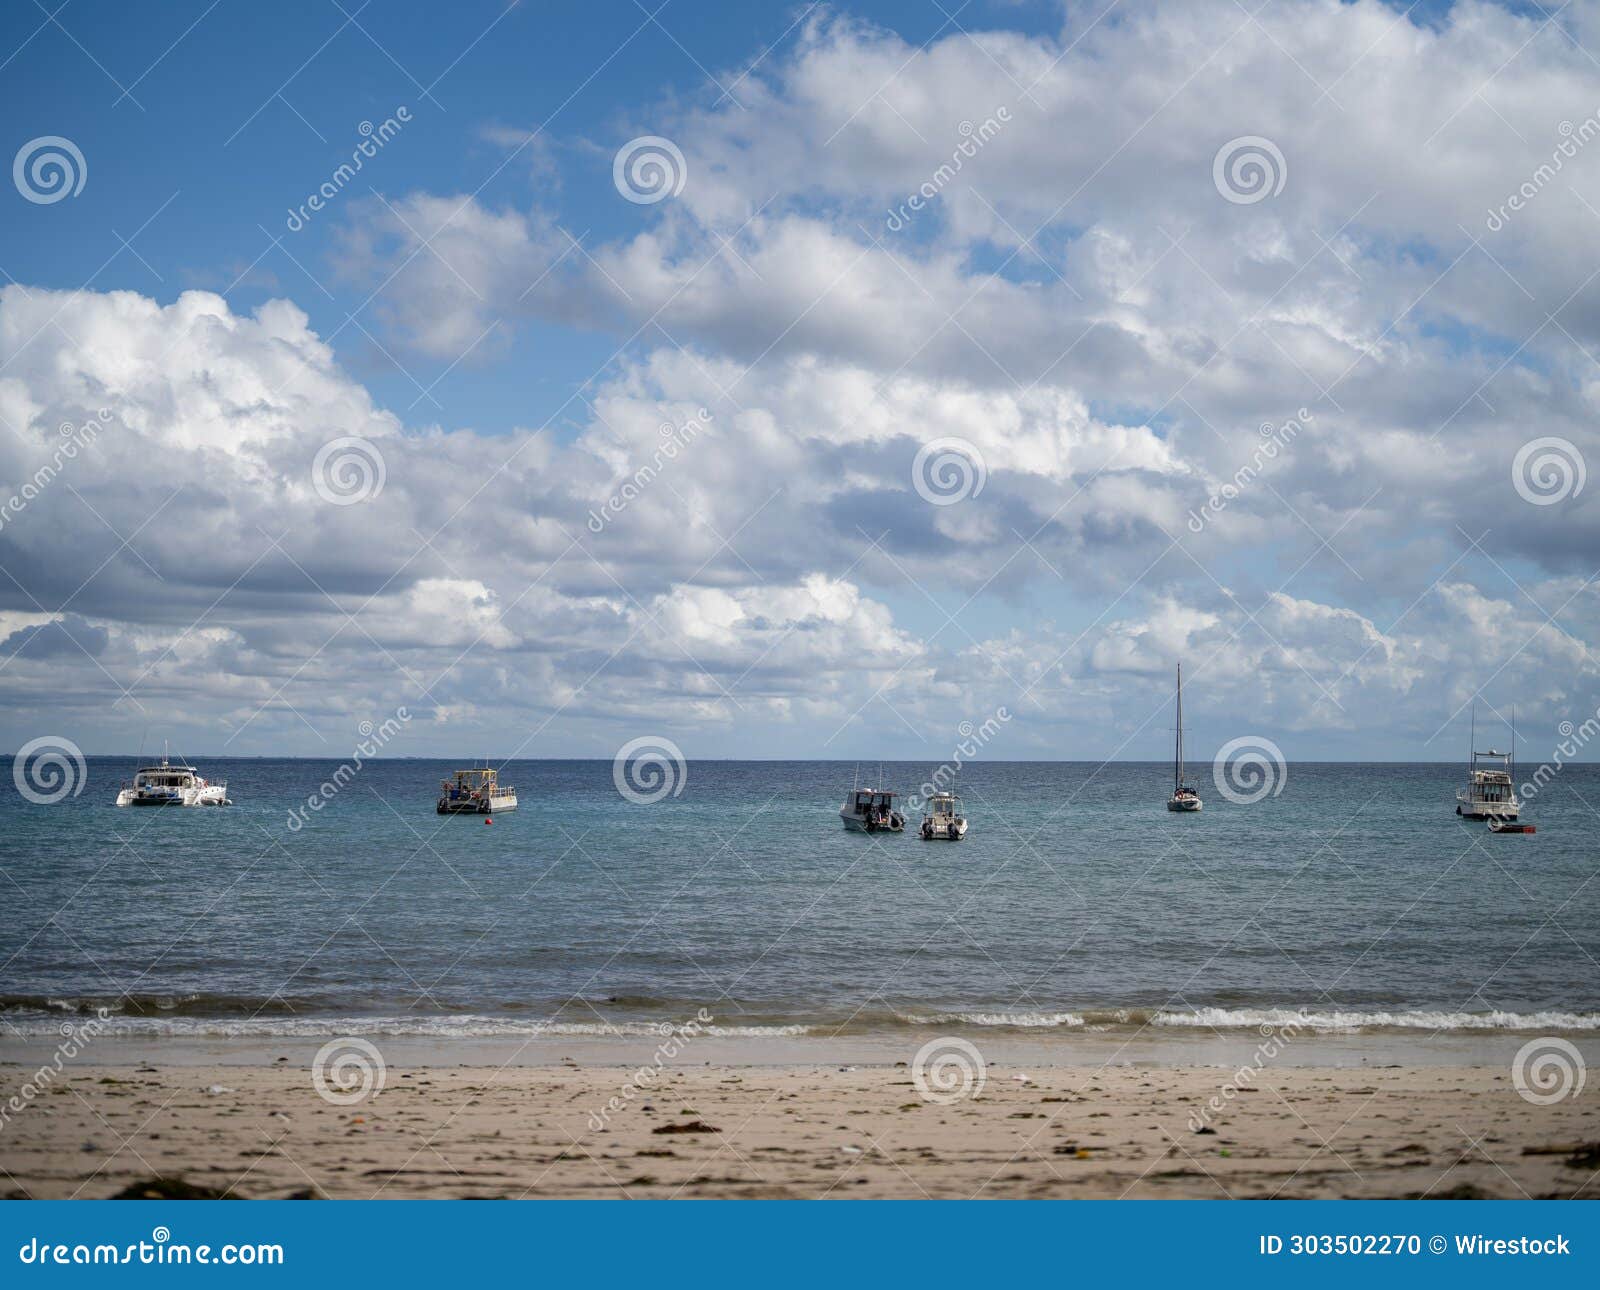 tranquil beach scene in the city of pemba in the cabo delgado province of mozambique.